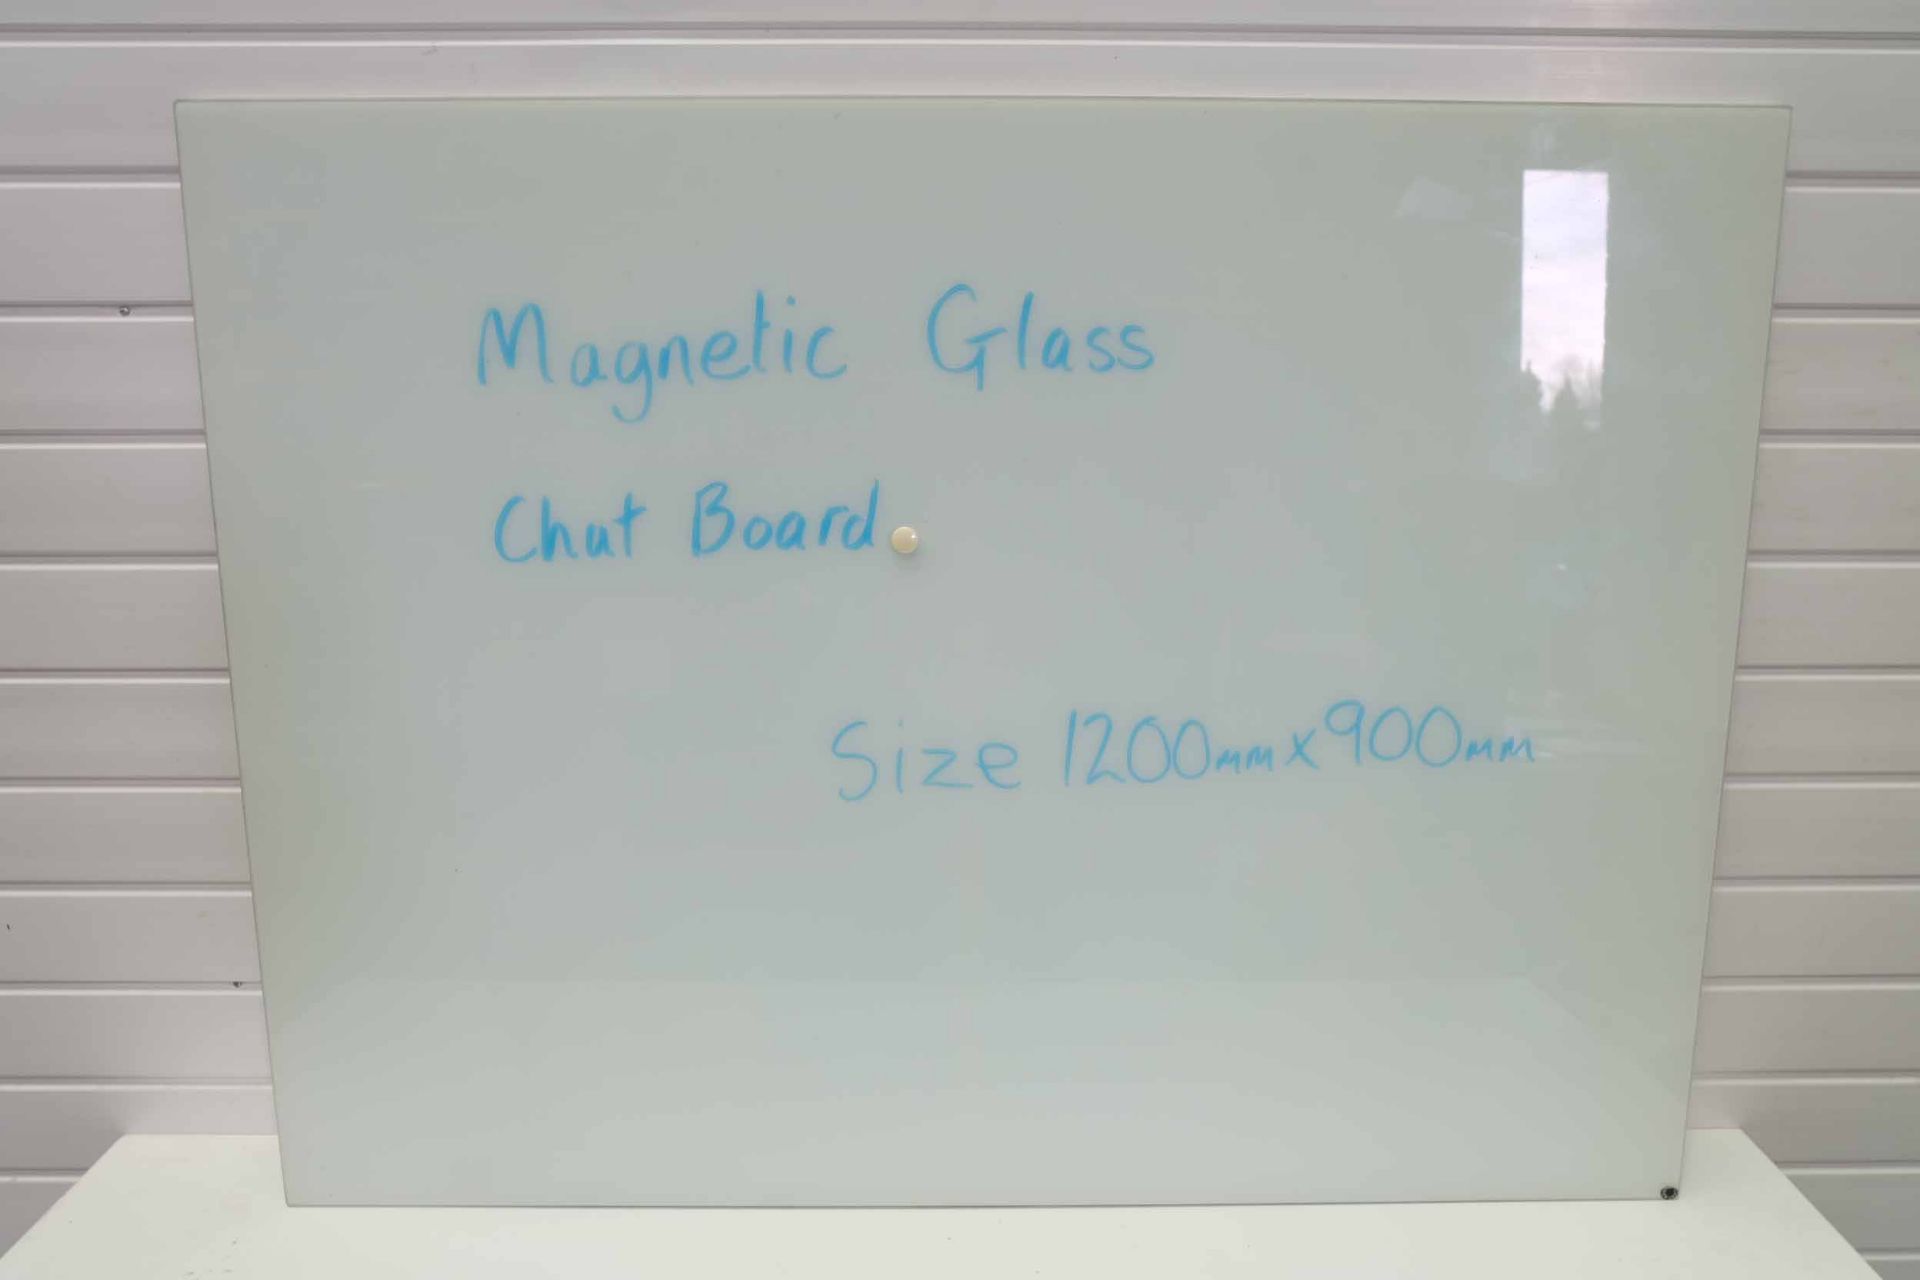 Chat Box Magnetic Glass Whiteboard. Size 1200mm x 900mm. Horizontal or Vertical Hanging. - Image 4 of 4